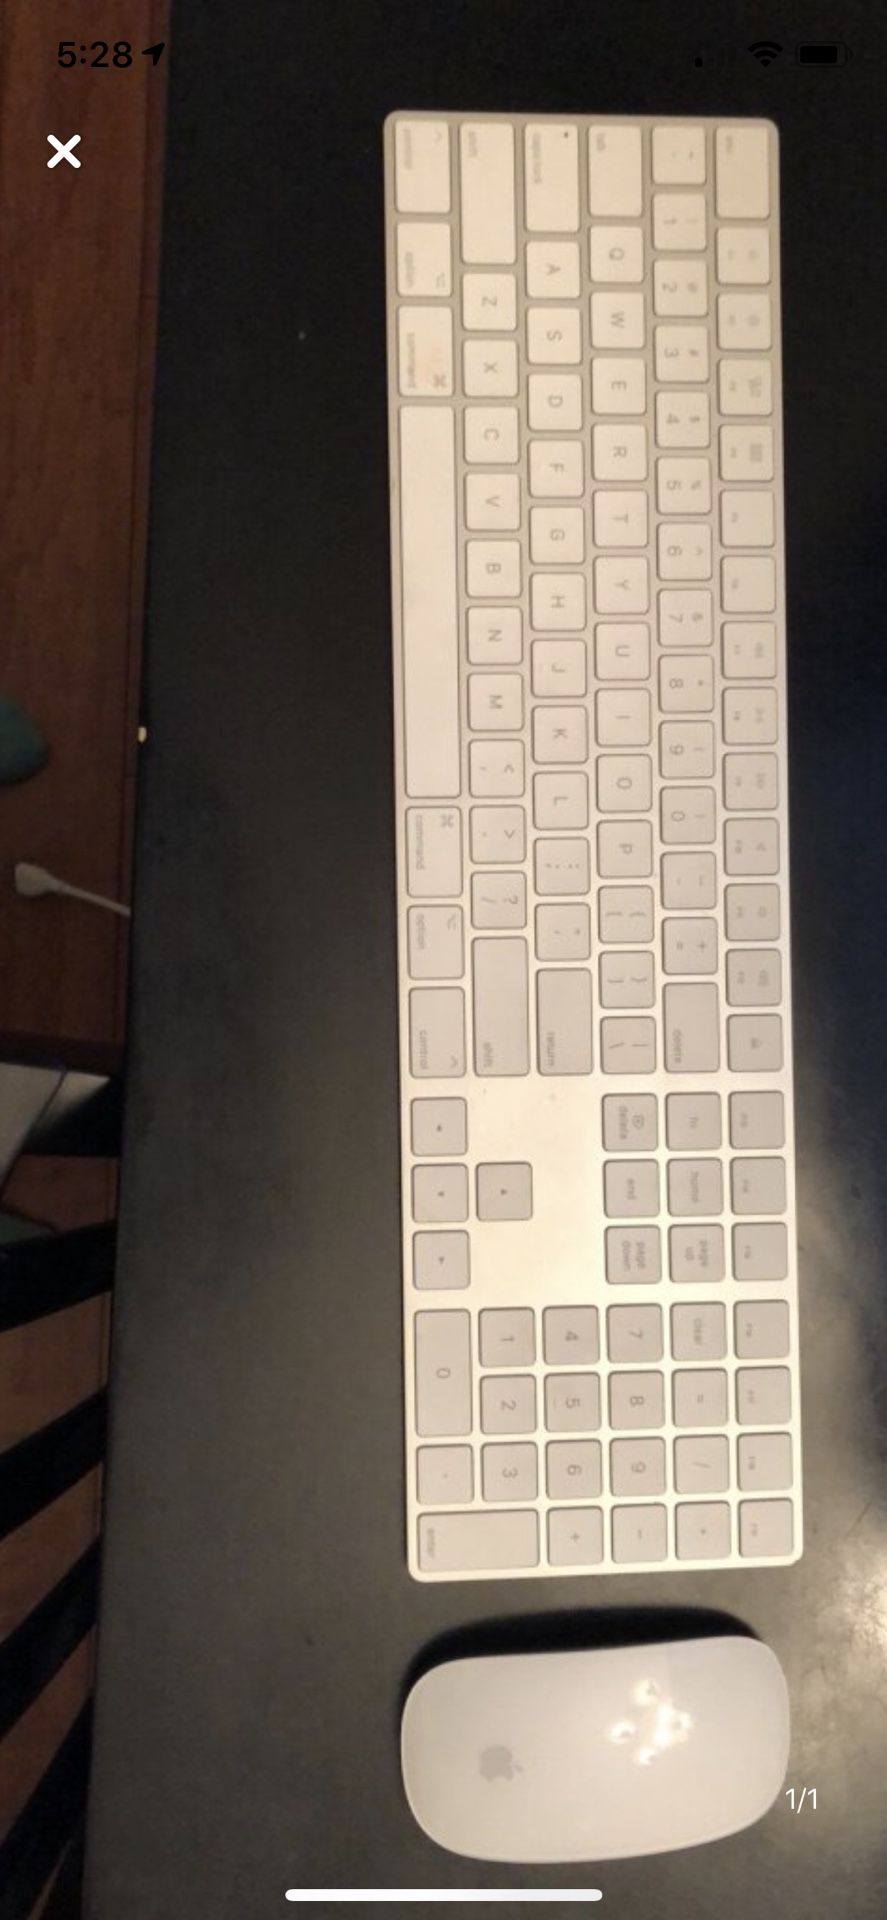 Wireless Apple Numeric Keyboard and Magic Mouse